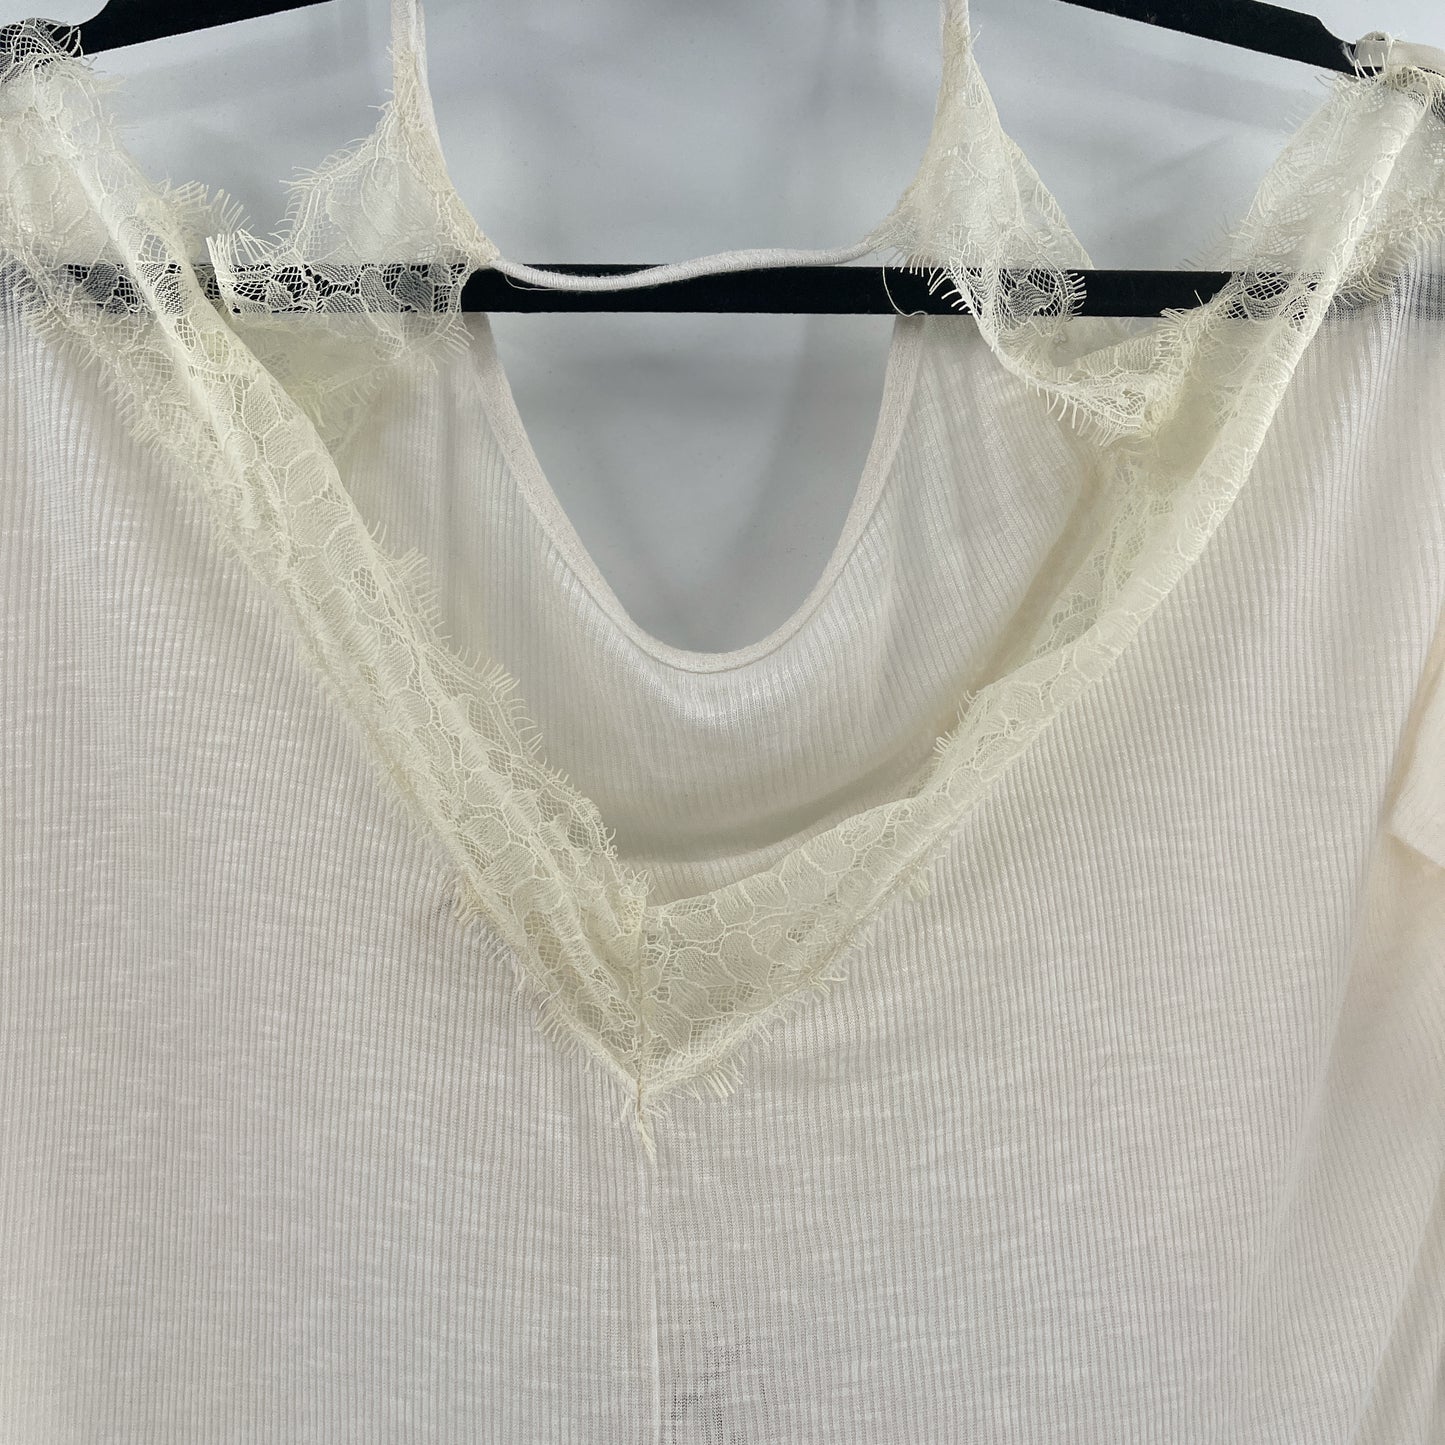 Pins and Needles White Lace Cold Shoulder (XS)